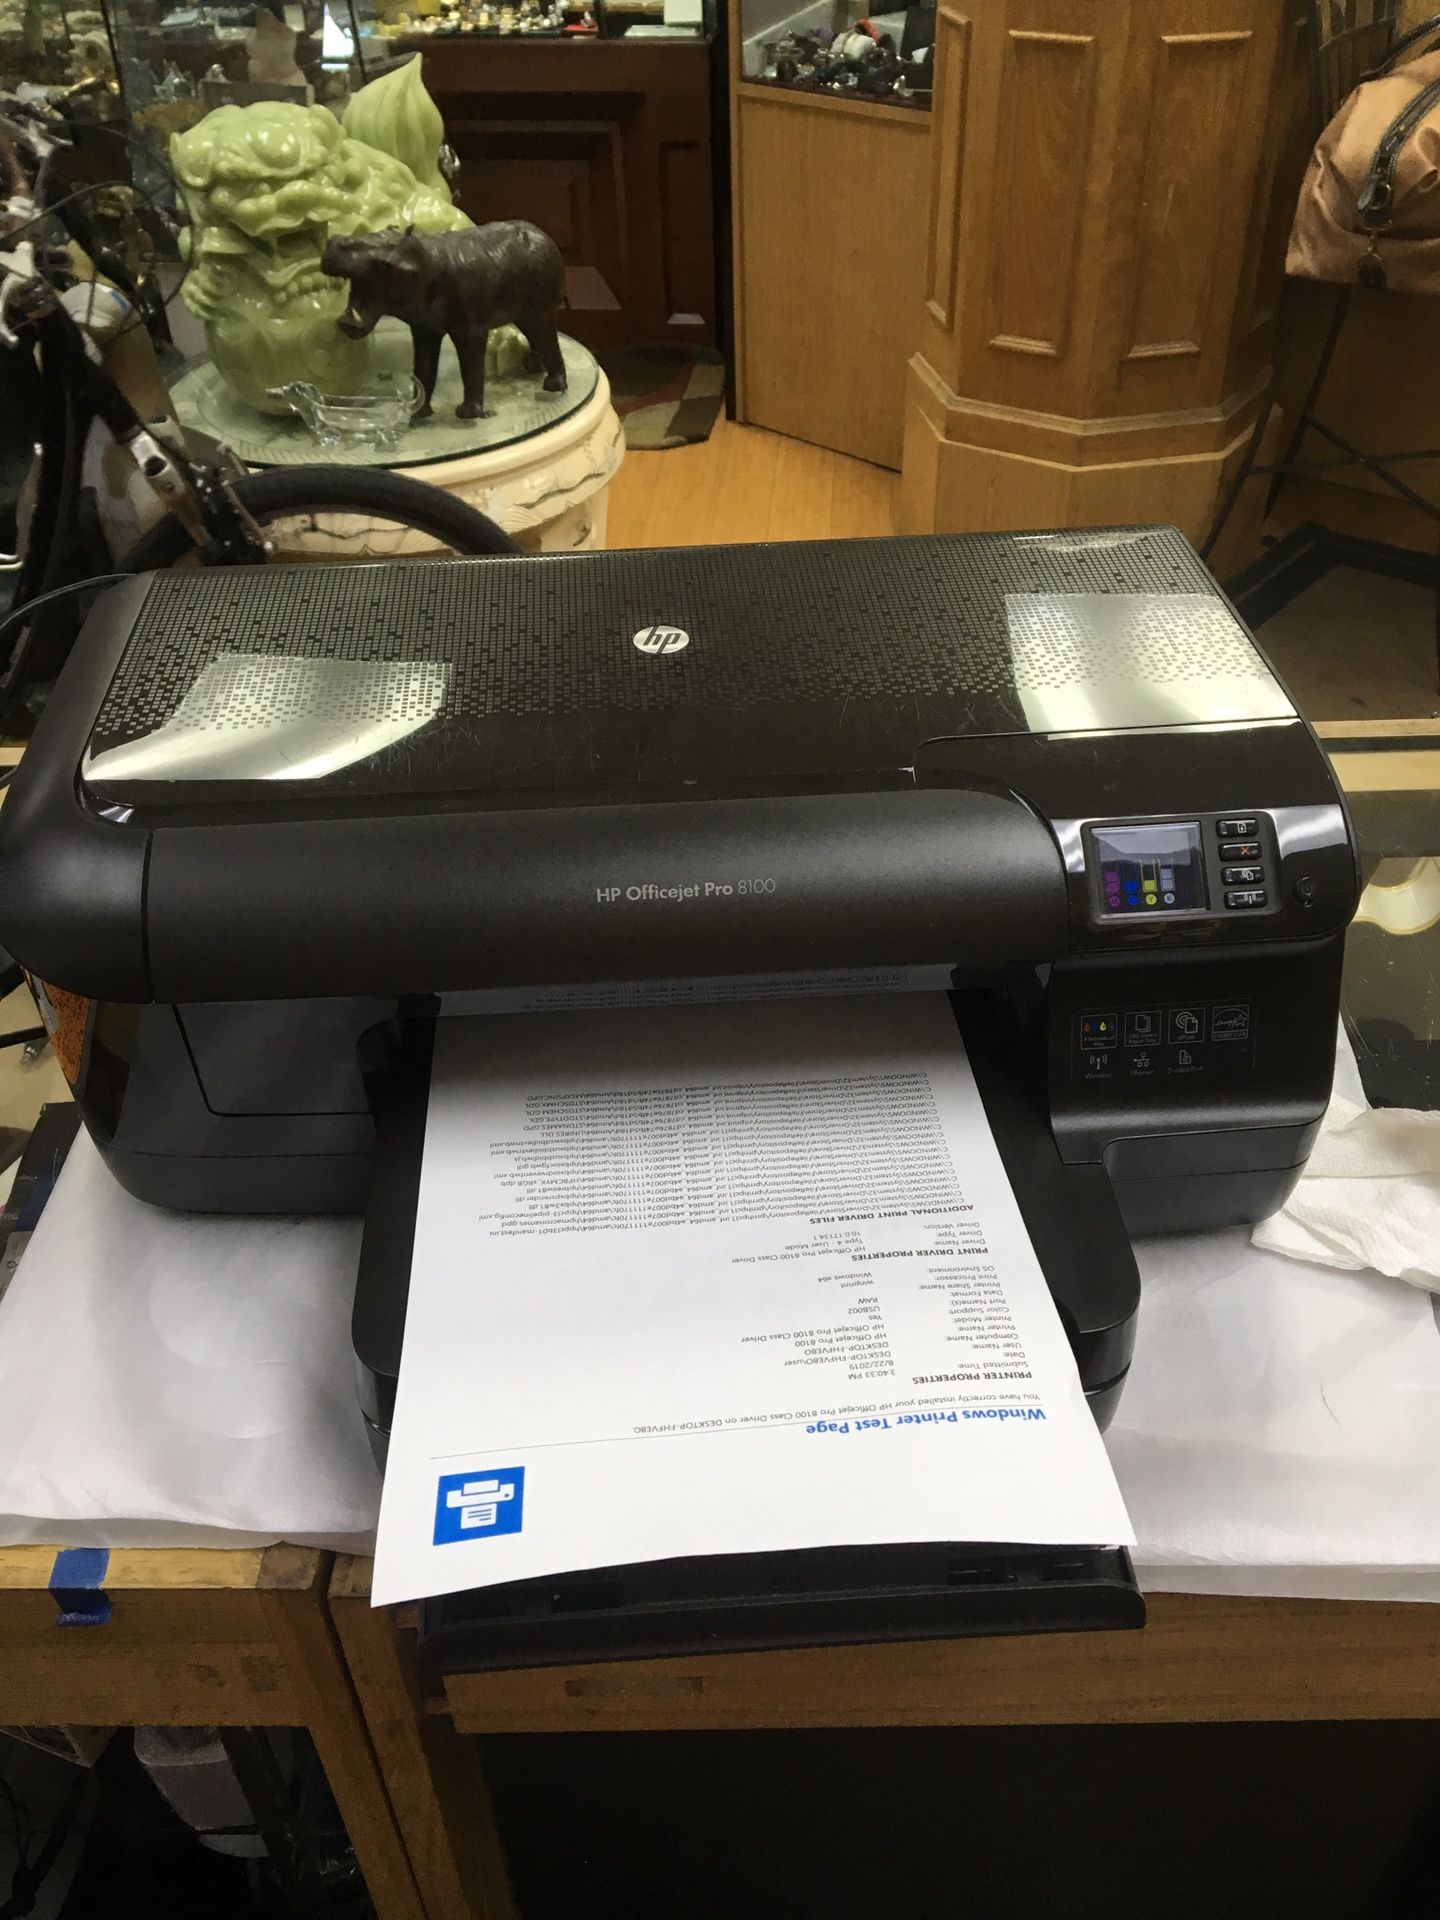 HP Officejet Pro 8100 Color Wireless Printer - Tested and in Great Working Condition